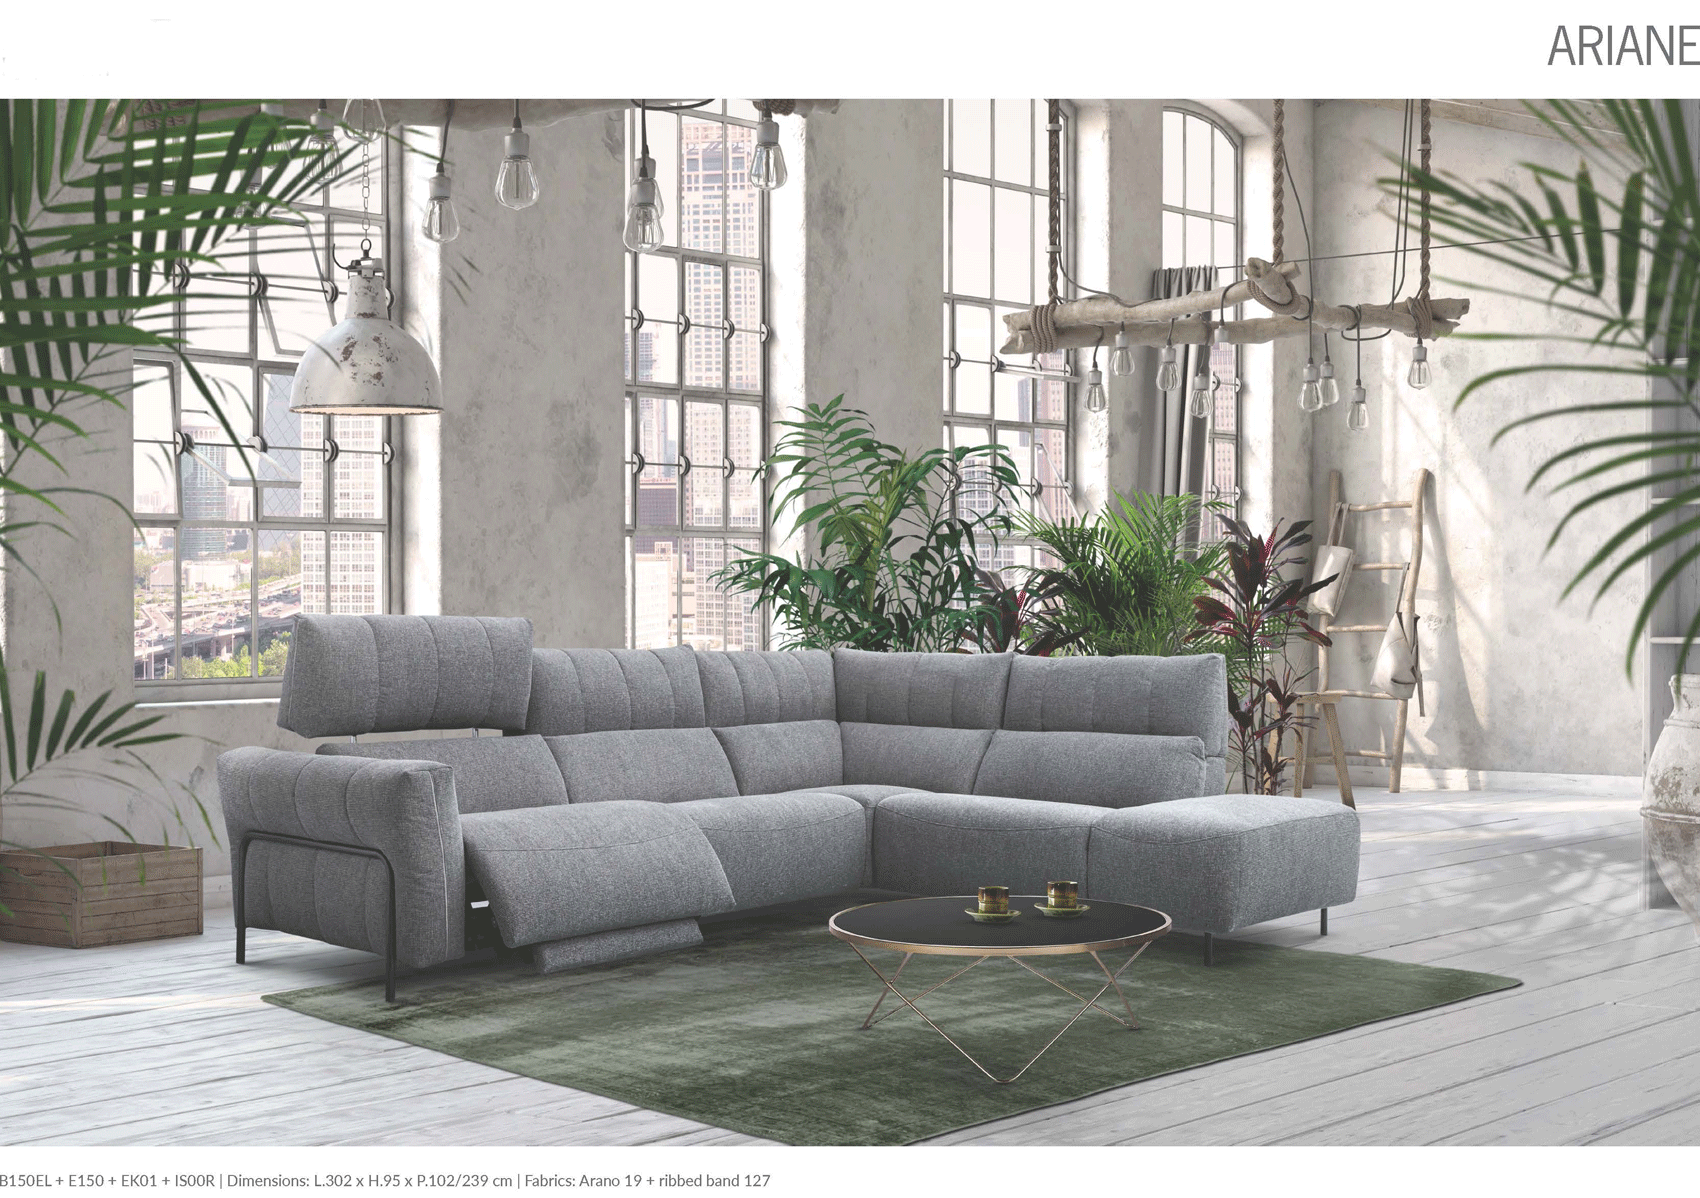 Living Room Furniture Sofas Loveseats and Chairs Ariane Sectional